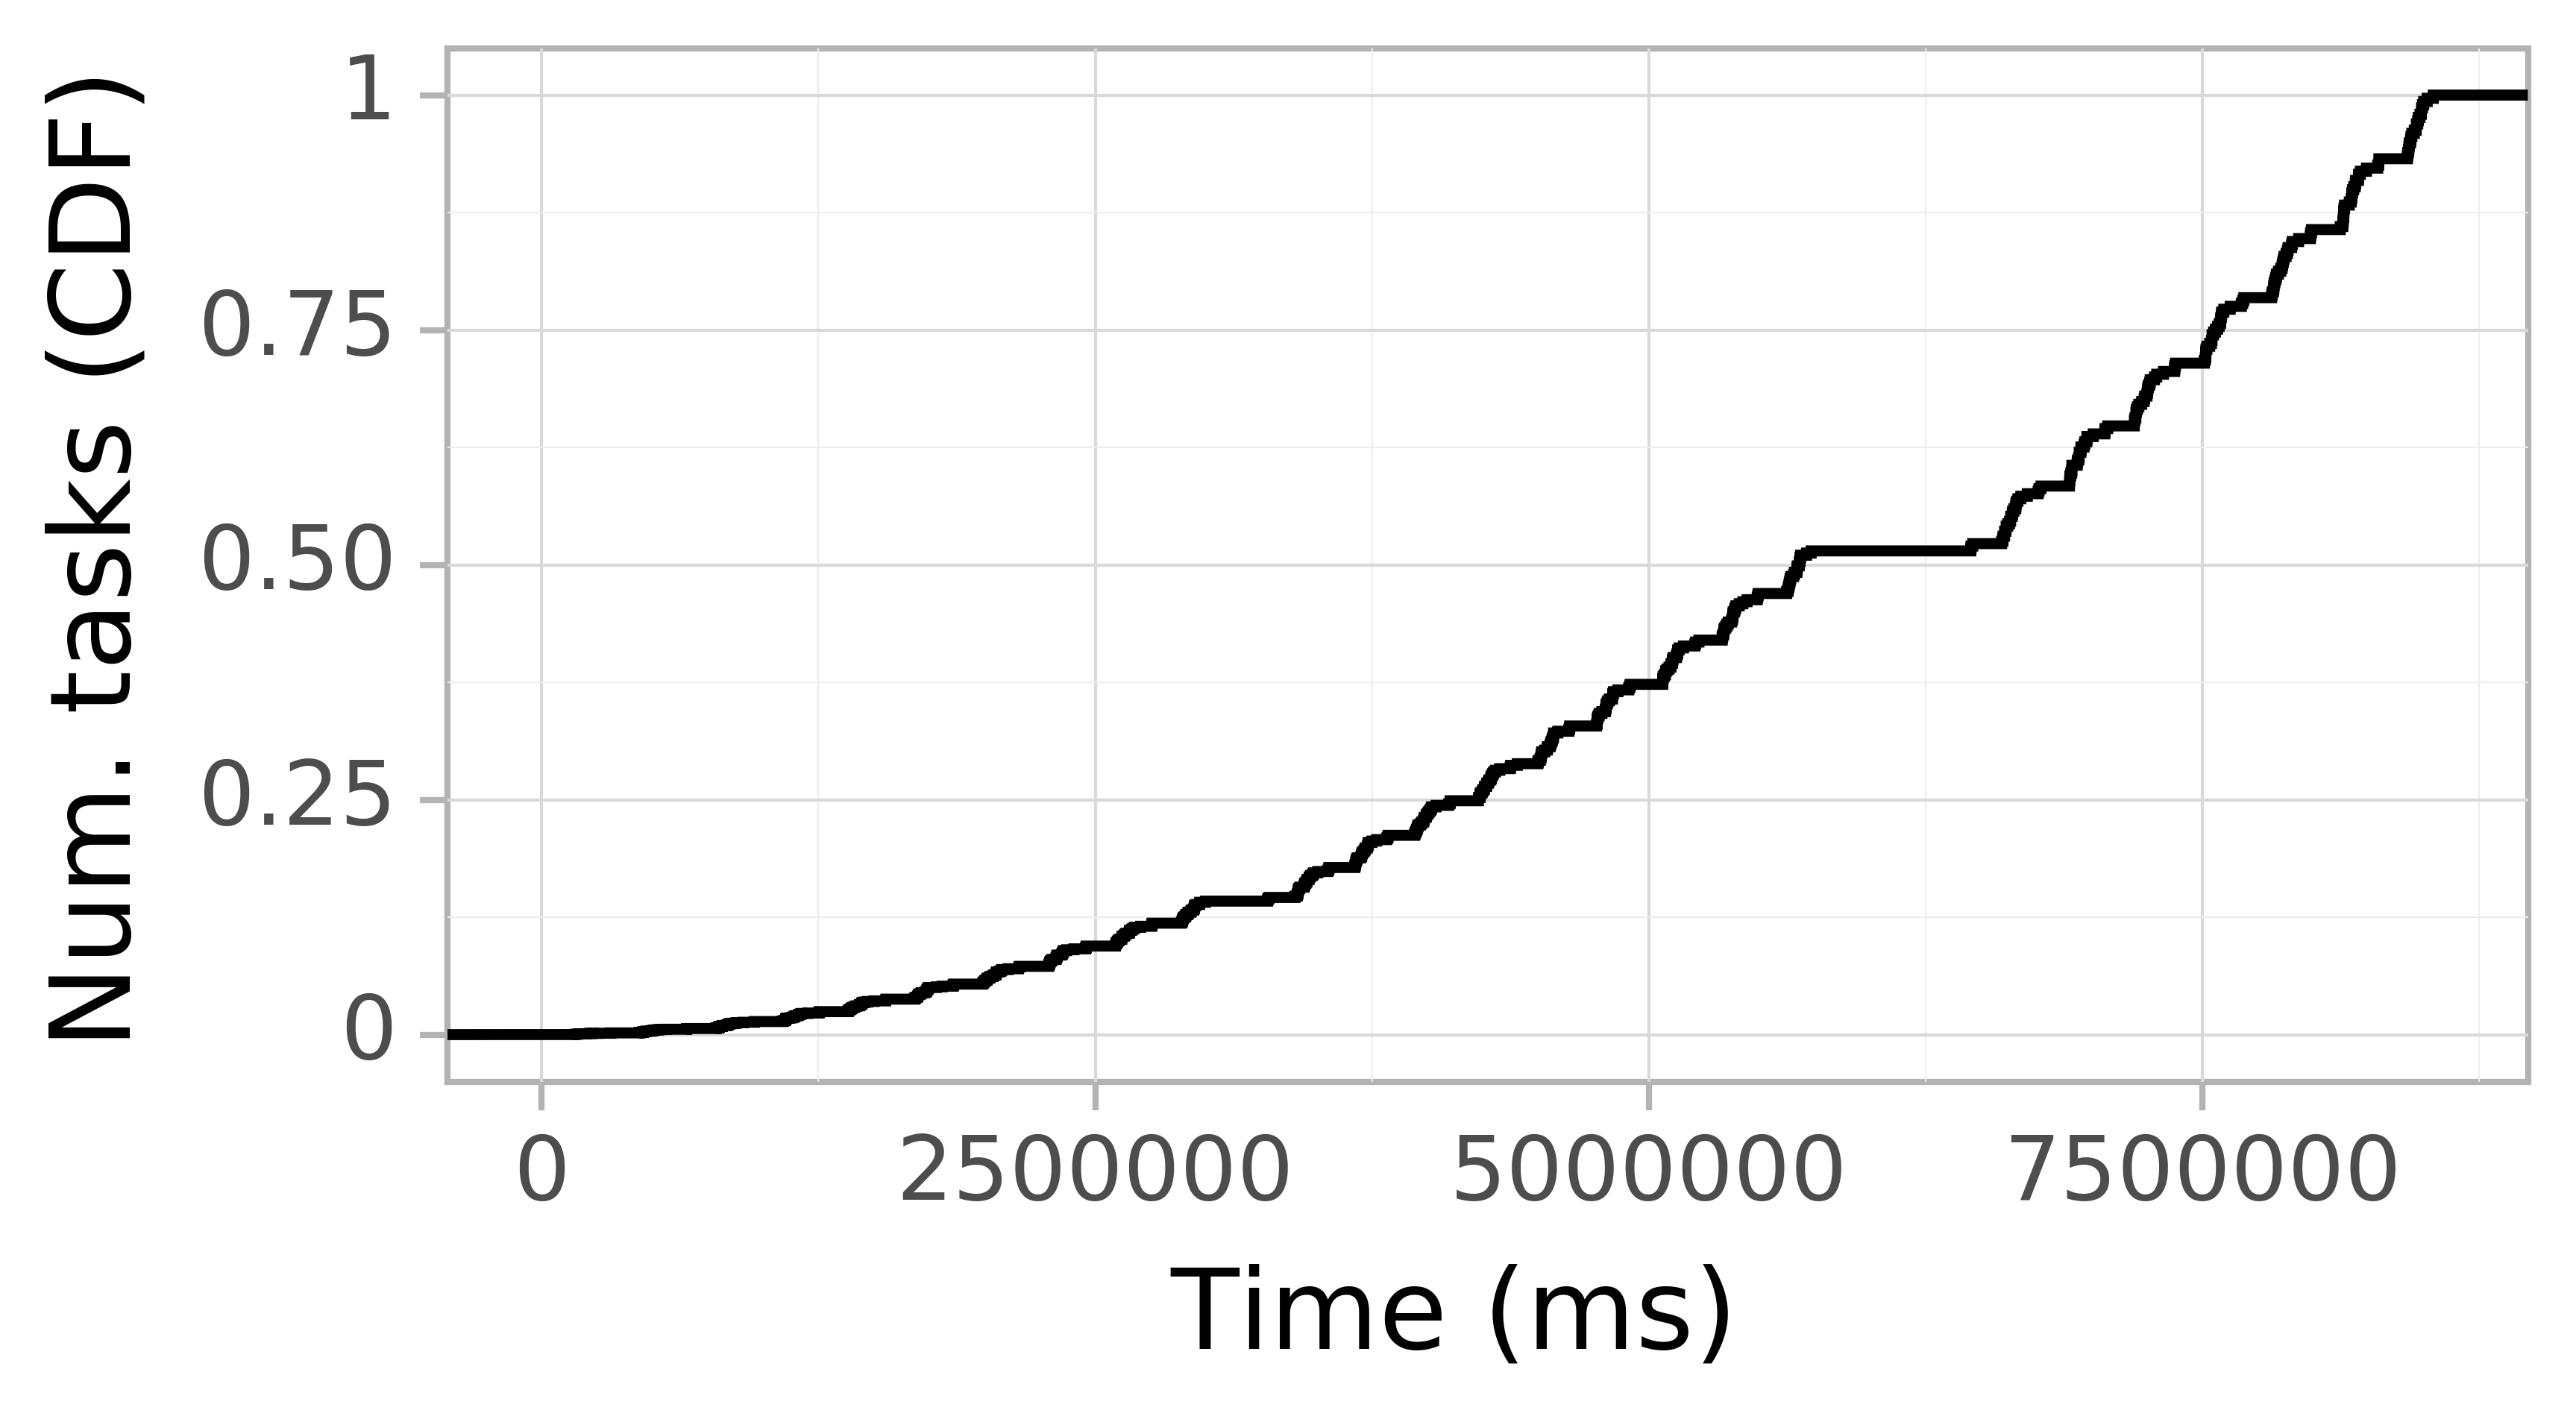 Task arrival CDF graph for the askalon-new_ee29 trace.